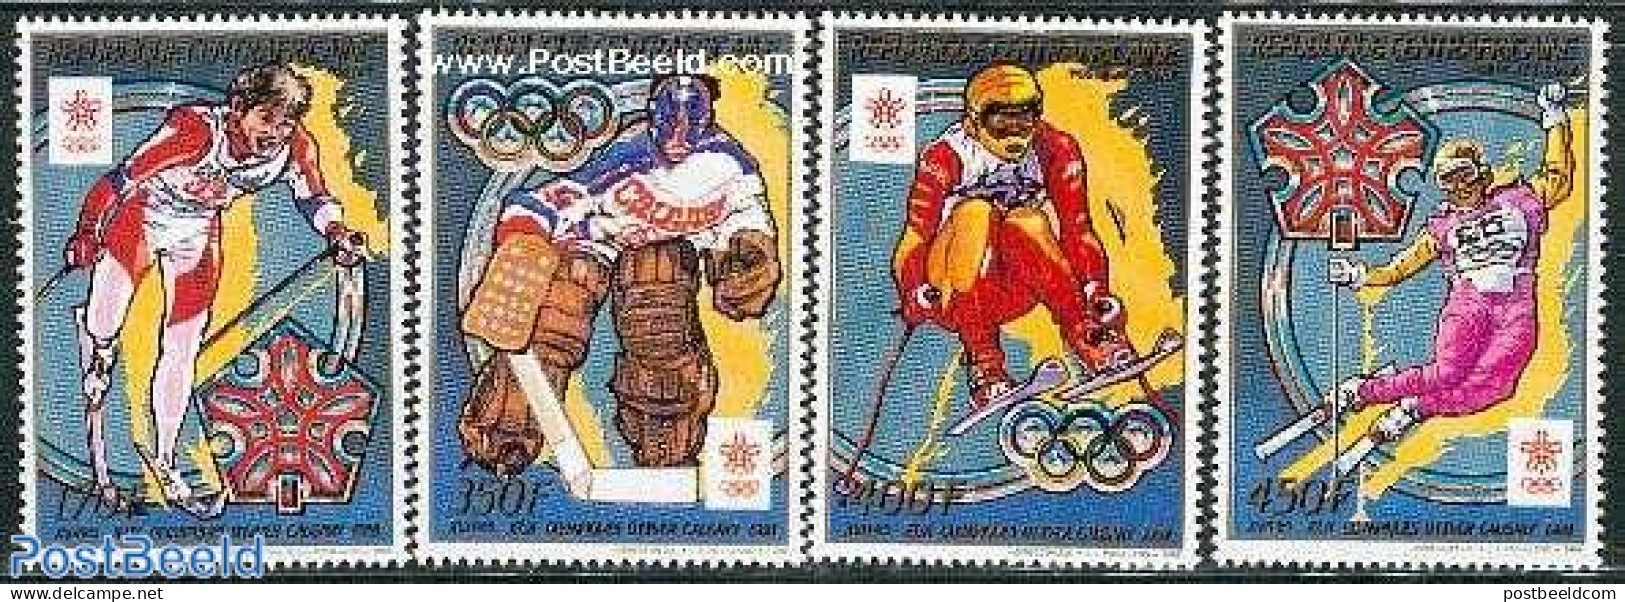 Central Africa 1988 Olympic Winter Games 4v, Mint NH, Sport - Ice Hockey - Olympic Winter Games - Skiing - Hockey (Ijs)